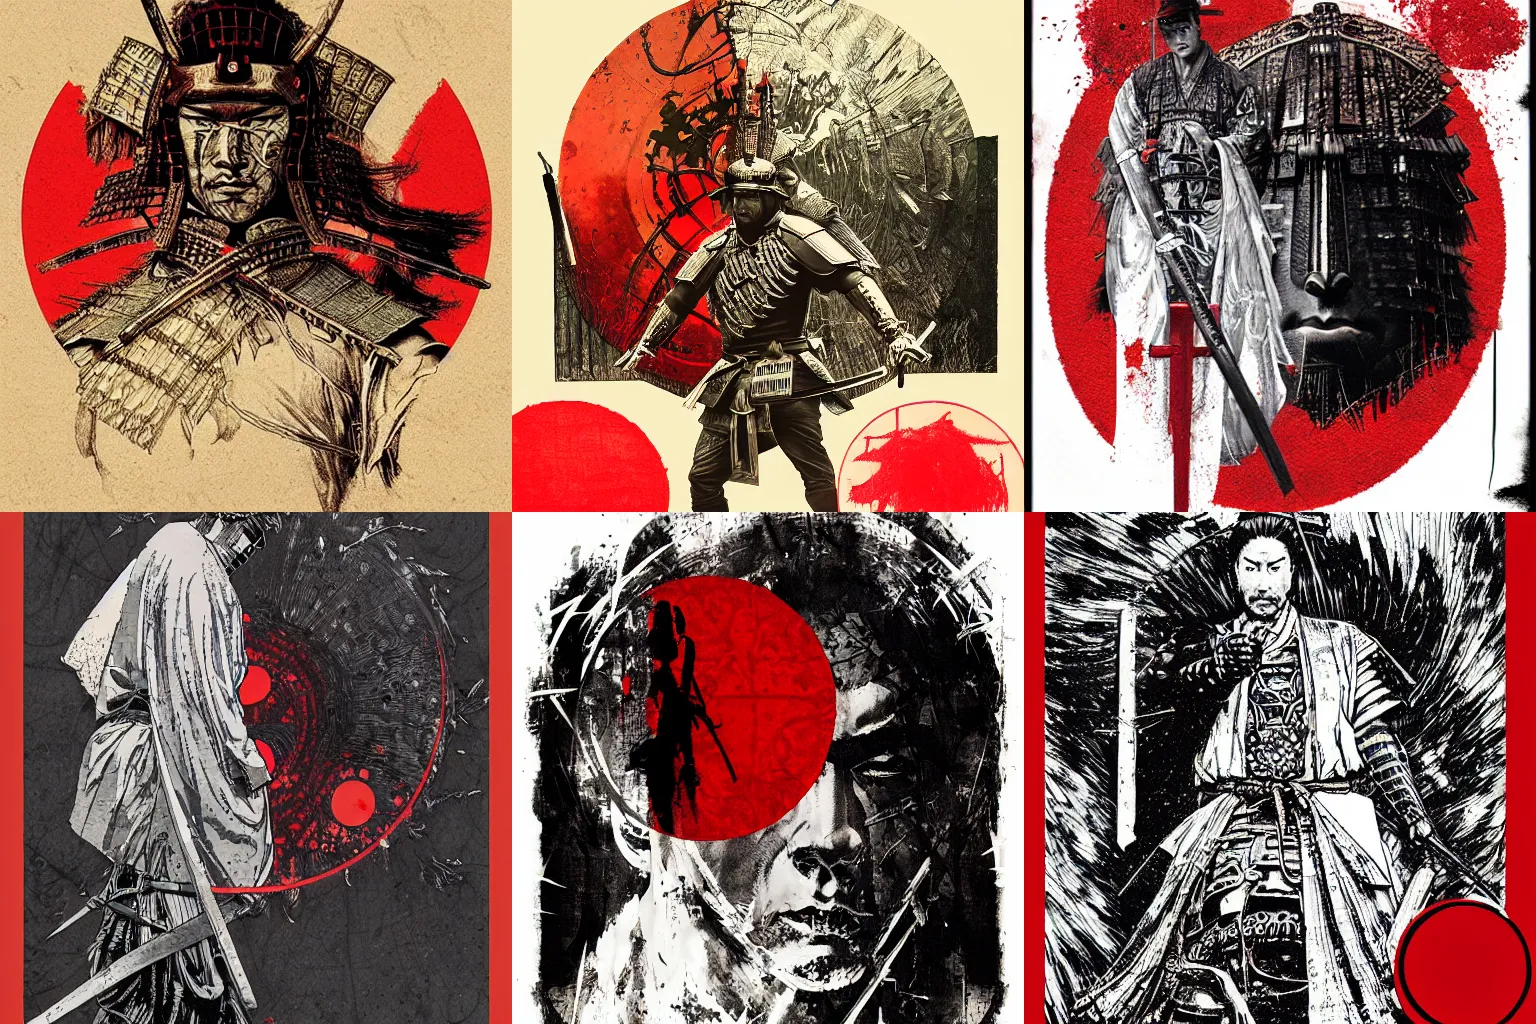 Prompt: artwork by Franklin Booth and Russ Mills showing a samurai in front of a red circle